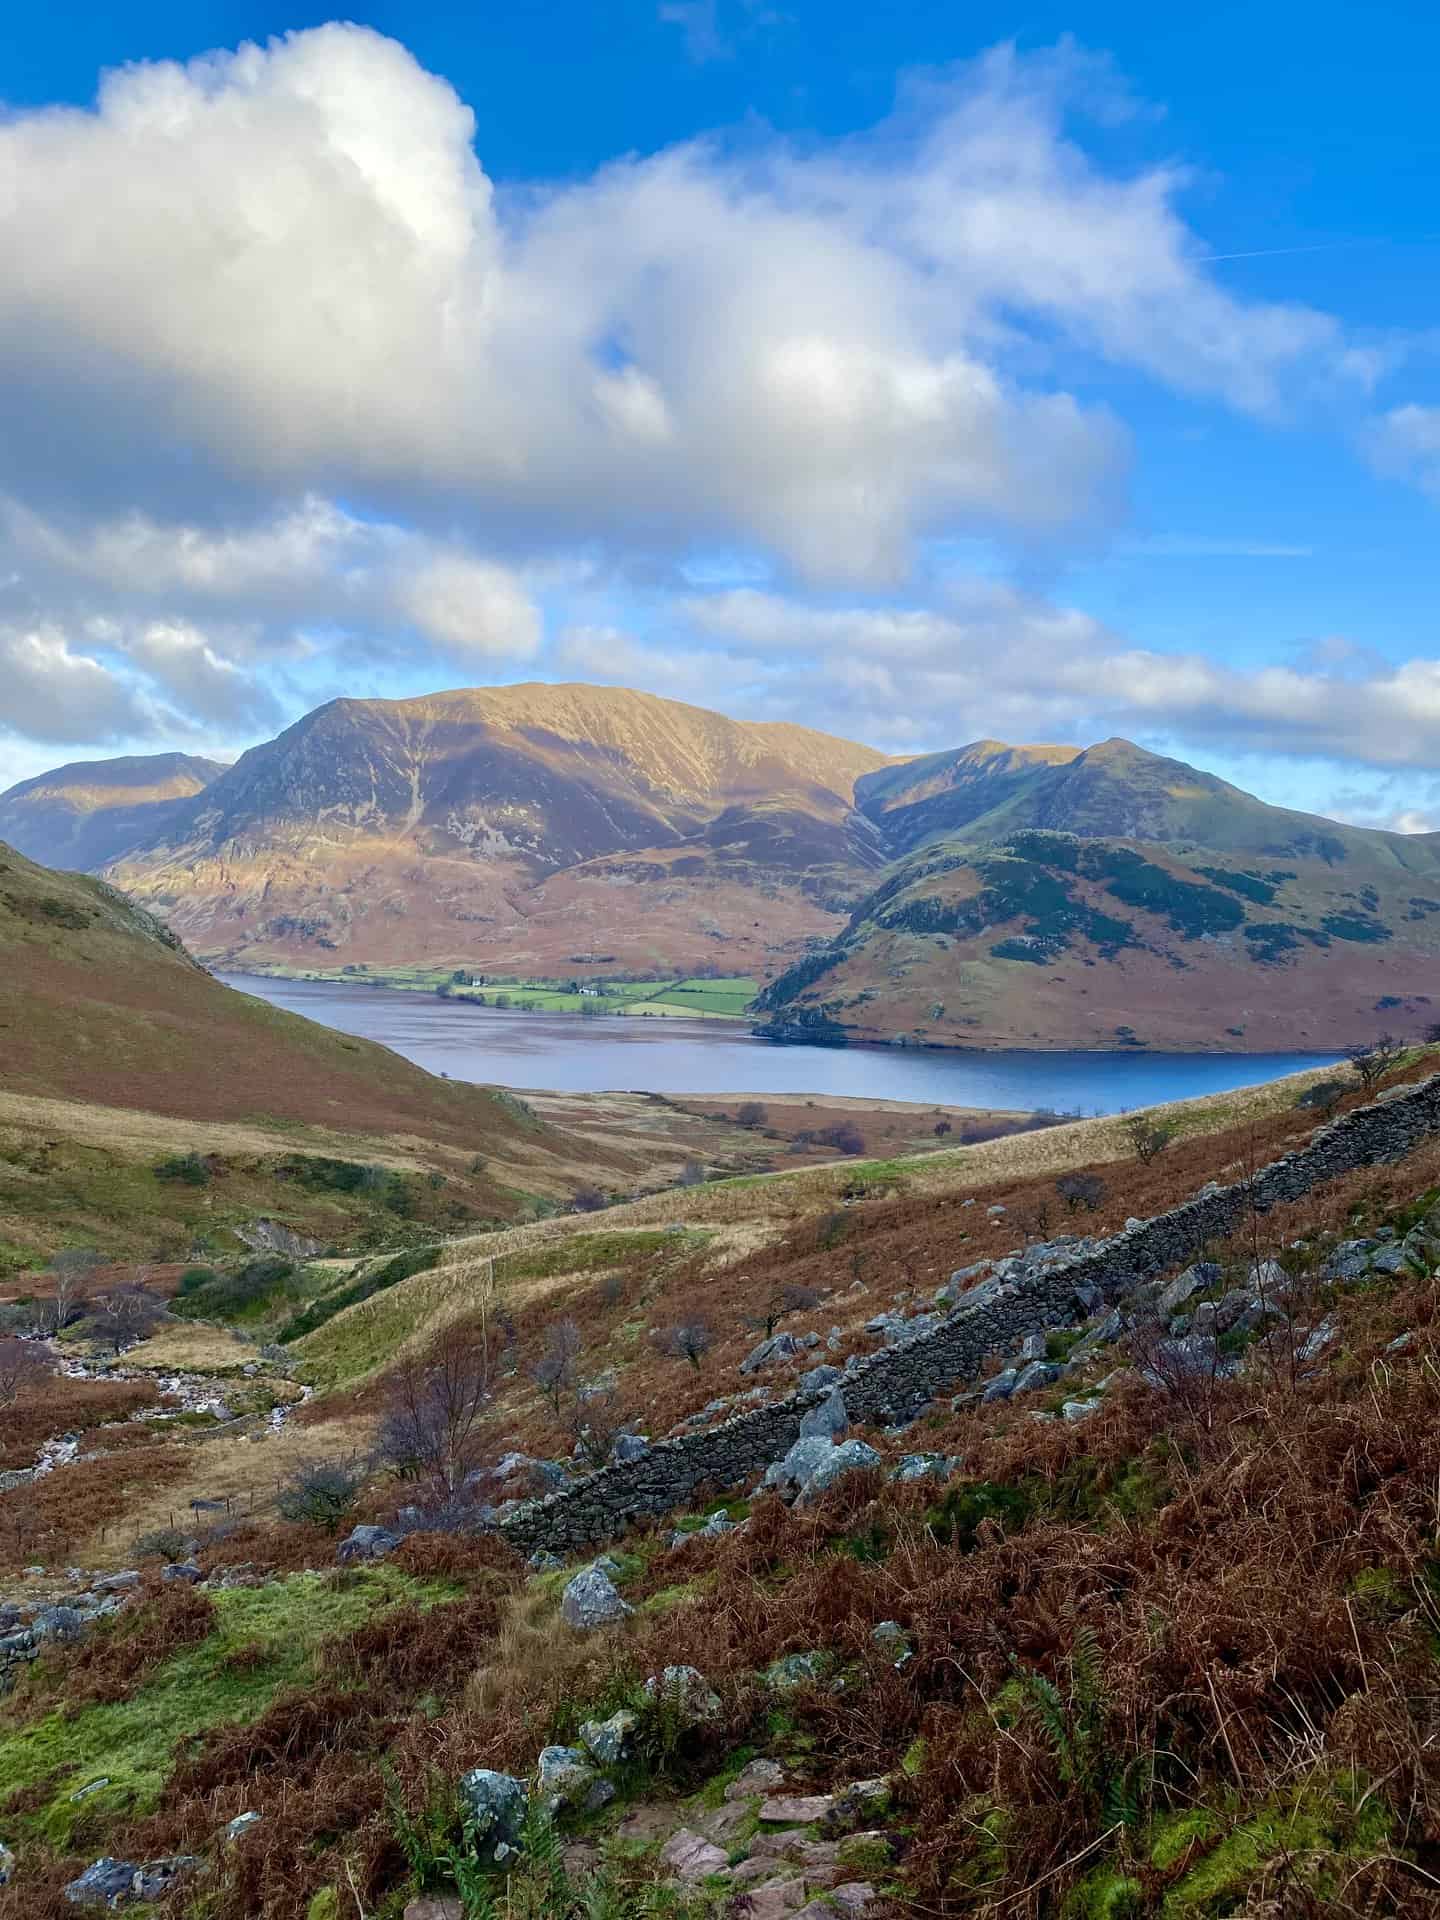 The view across Crummock Water to Grasmoor from Scale Force.